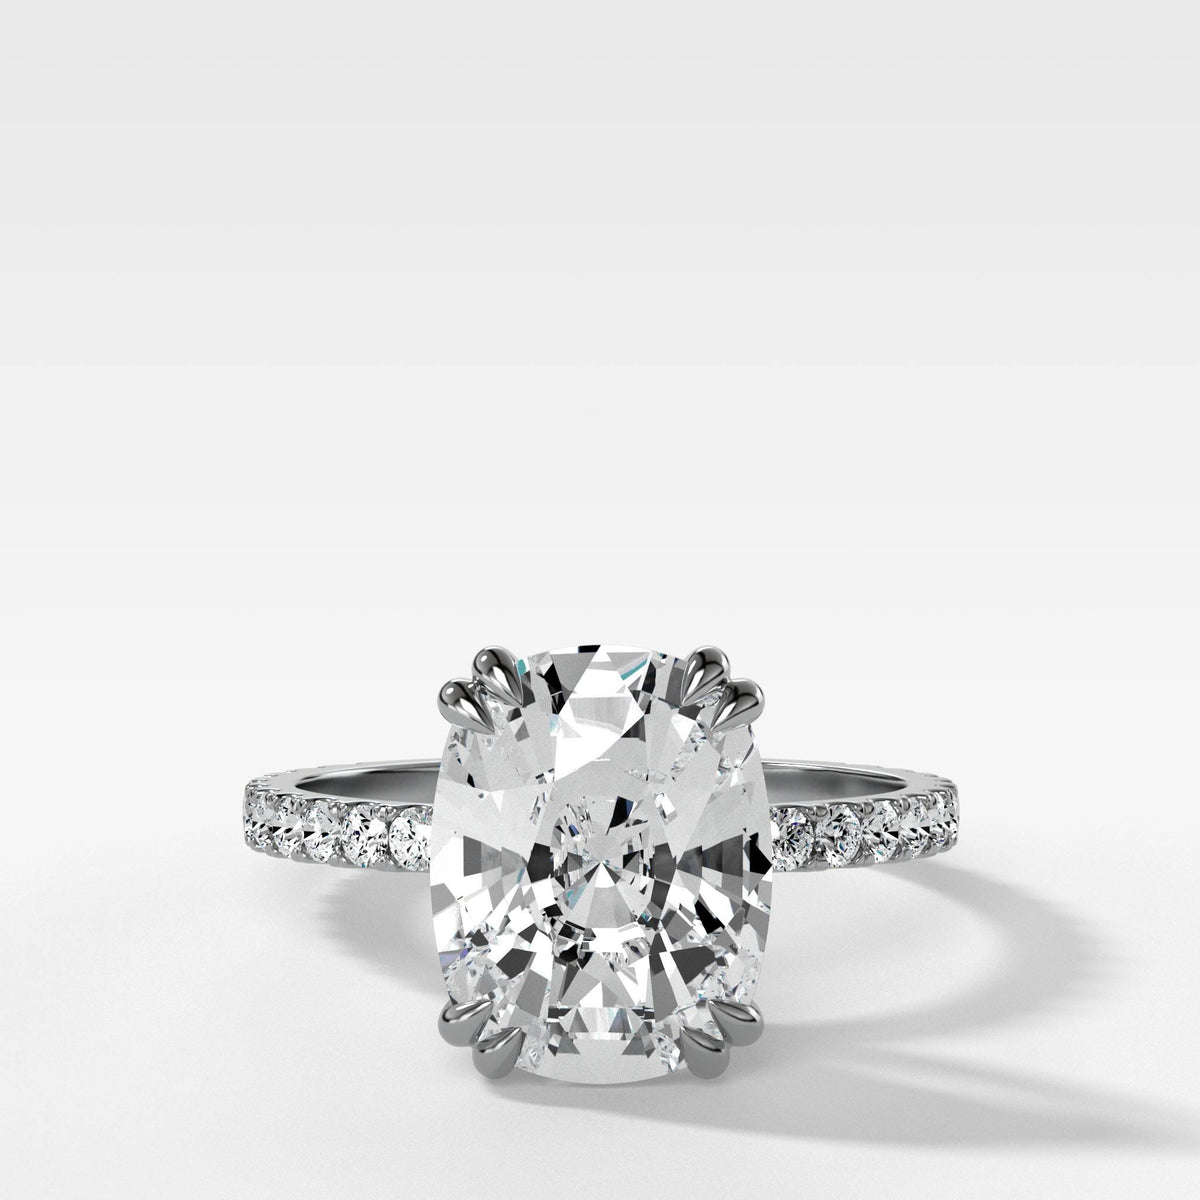 Signature Pave Engagement Ring With Elongated Cushion Cut by Good Stone in White Gold